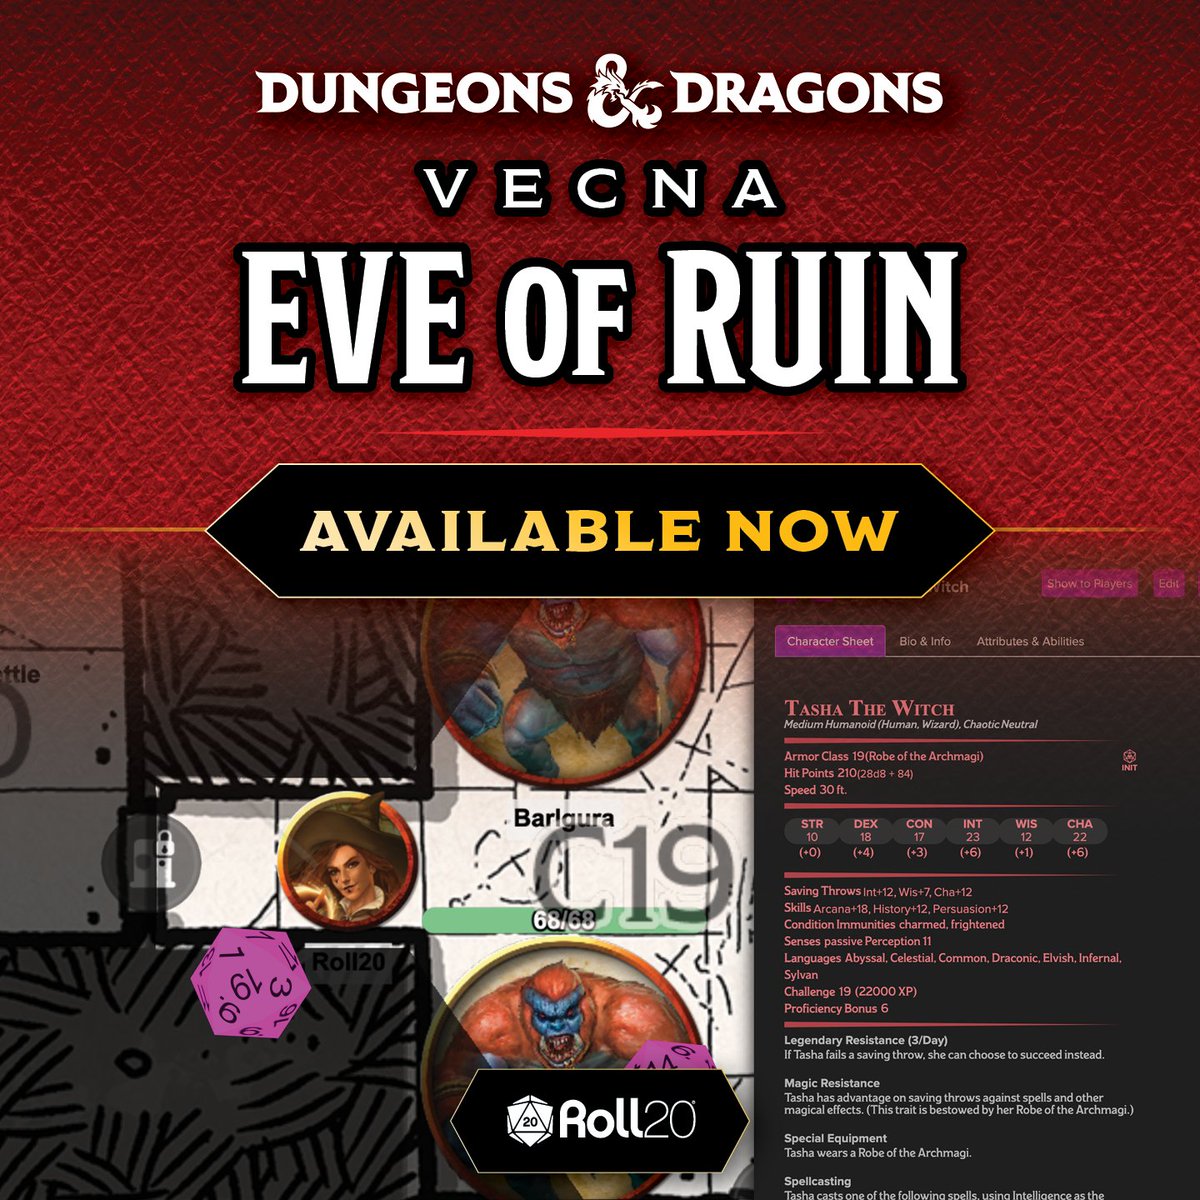 D&D's Vecna: Eve of Ruin is LIVE NOW! The Roll20 edition provides everything you need to play online: a digital rulebook, official character sheets, 30 dynamically-lit maps, premade macros, 400+ tokens, and more. hubs.li/Q02x-T_-0